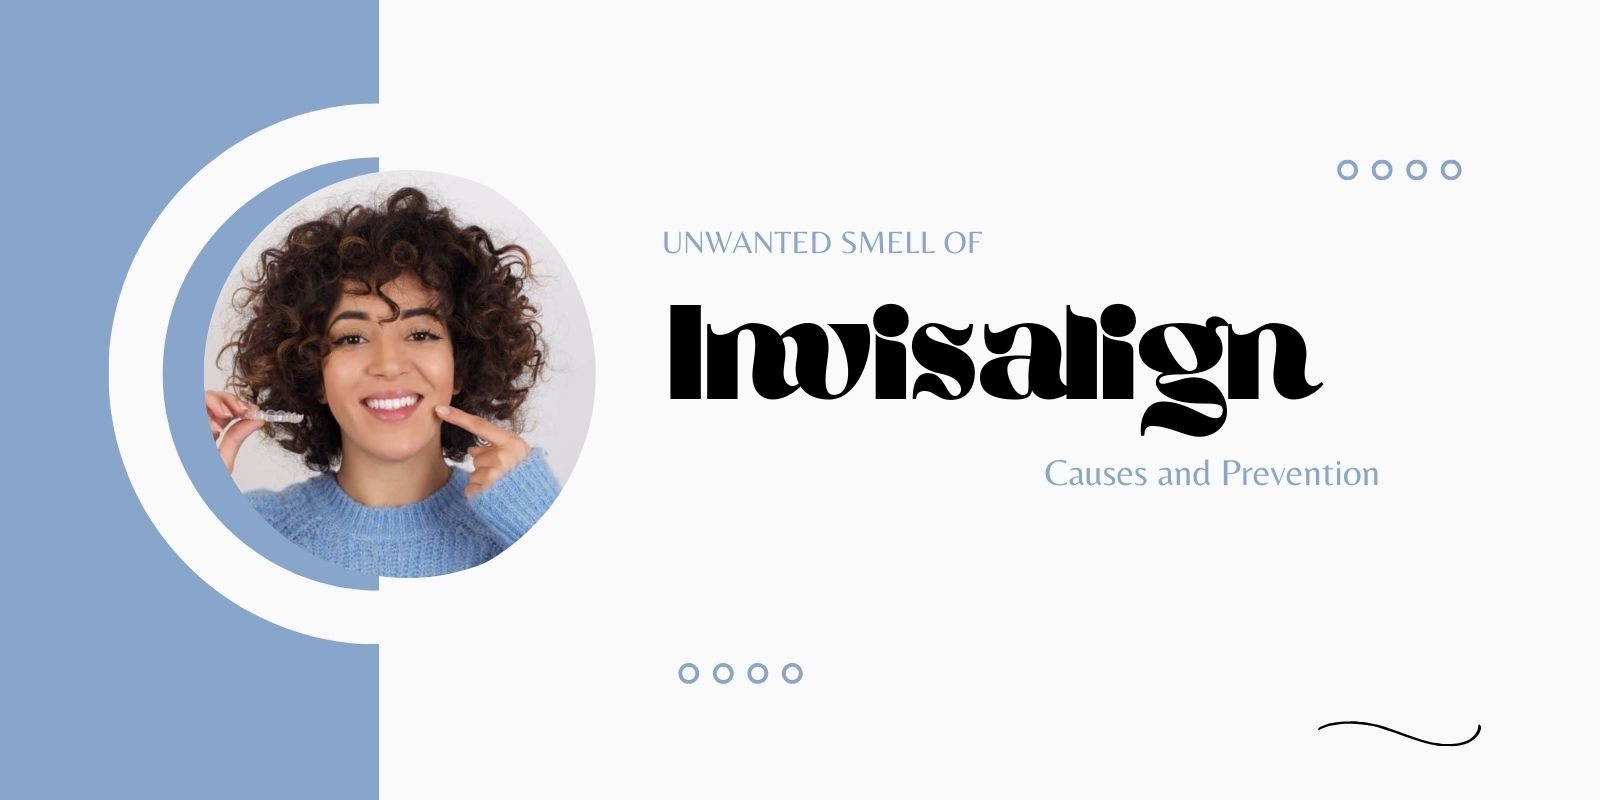 Unwanted smell of Invisalign: Causes and Prevention